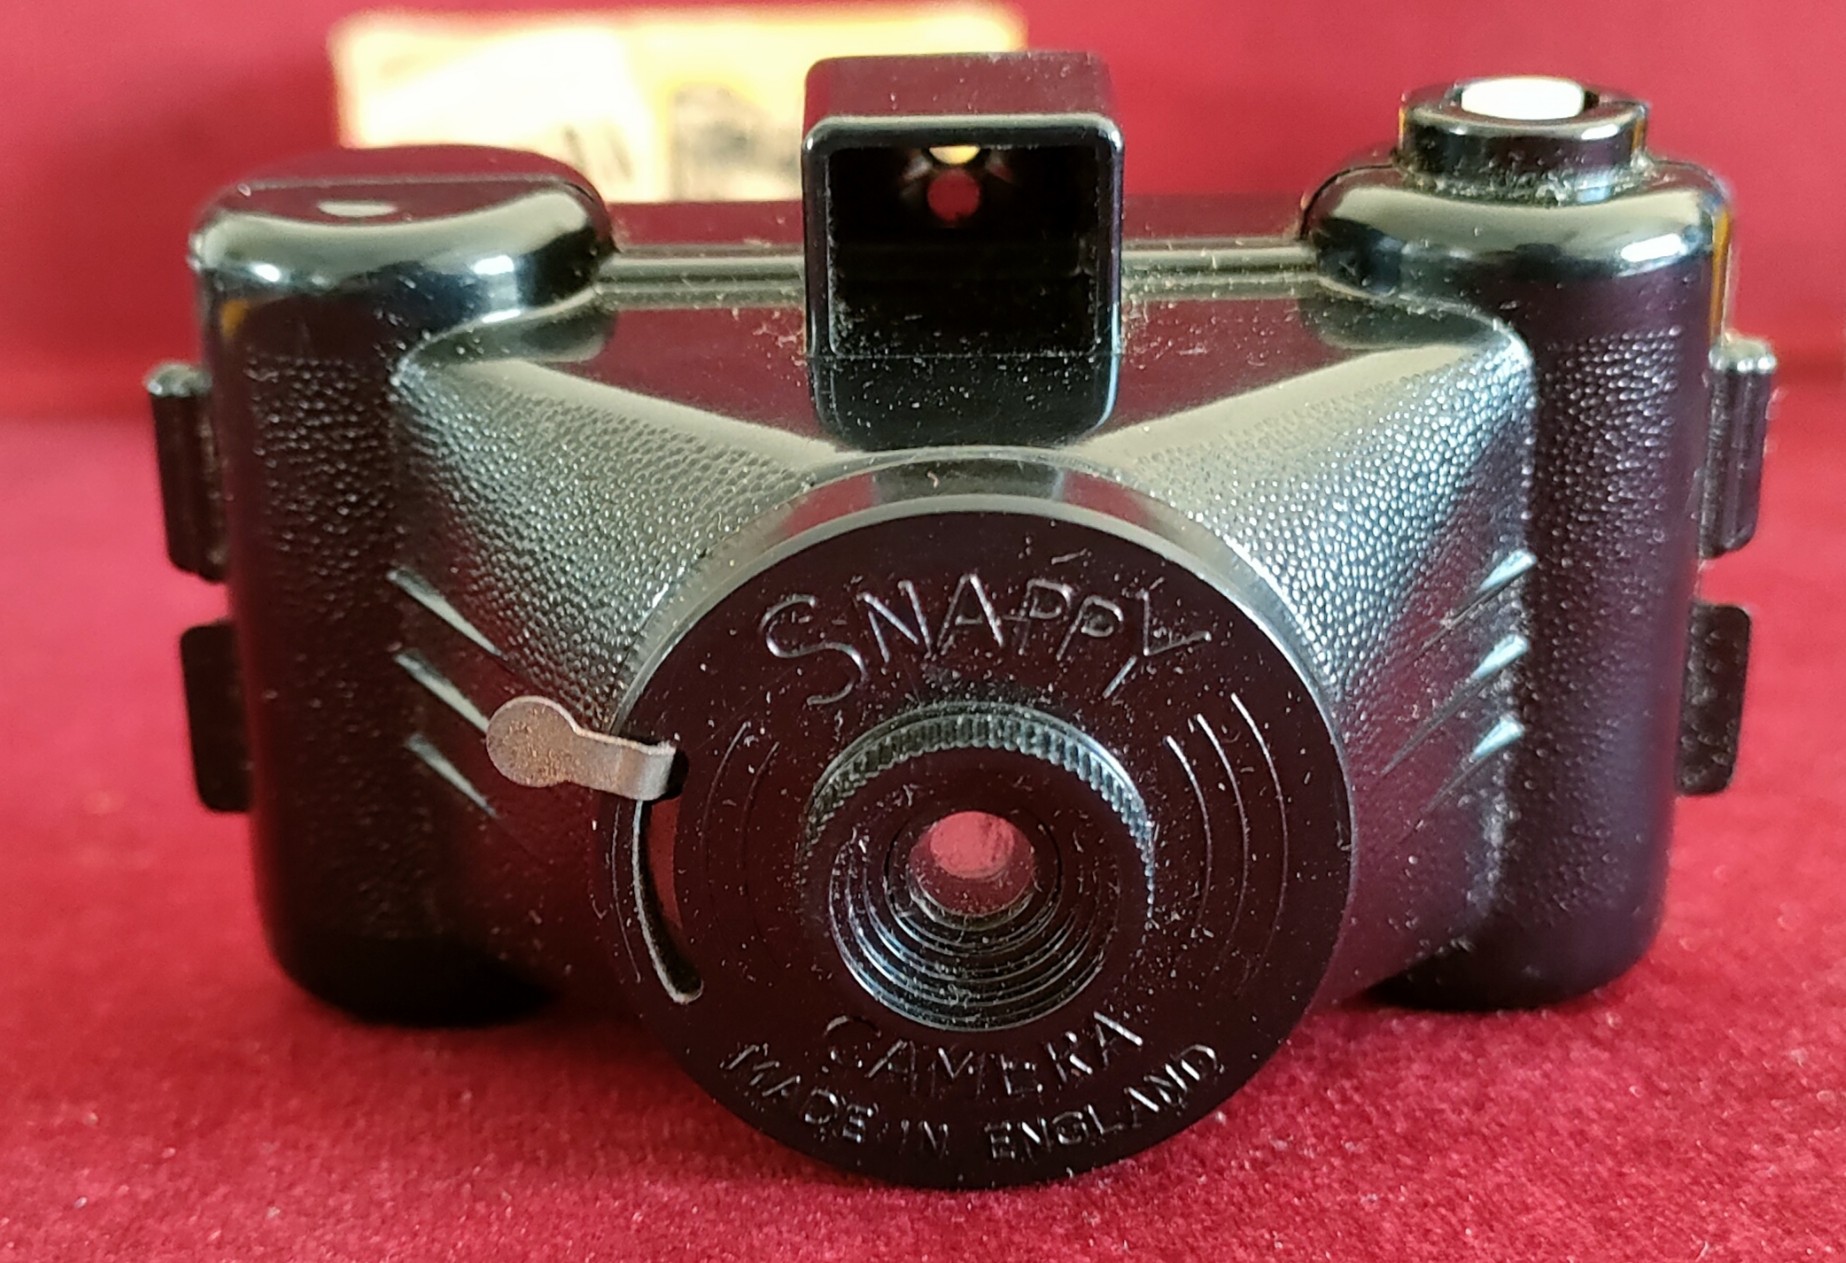 BOXED VINTAGE POCKET SIZE SNAPPY CAMERA Used condition, not tested for working - Image 2 of 2